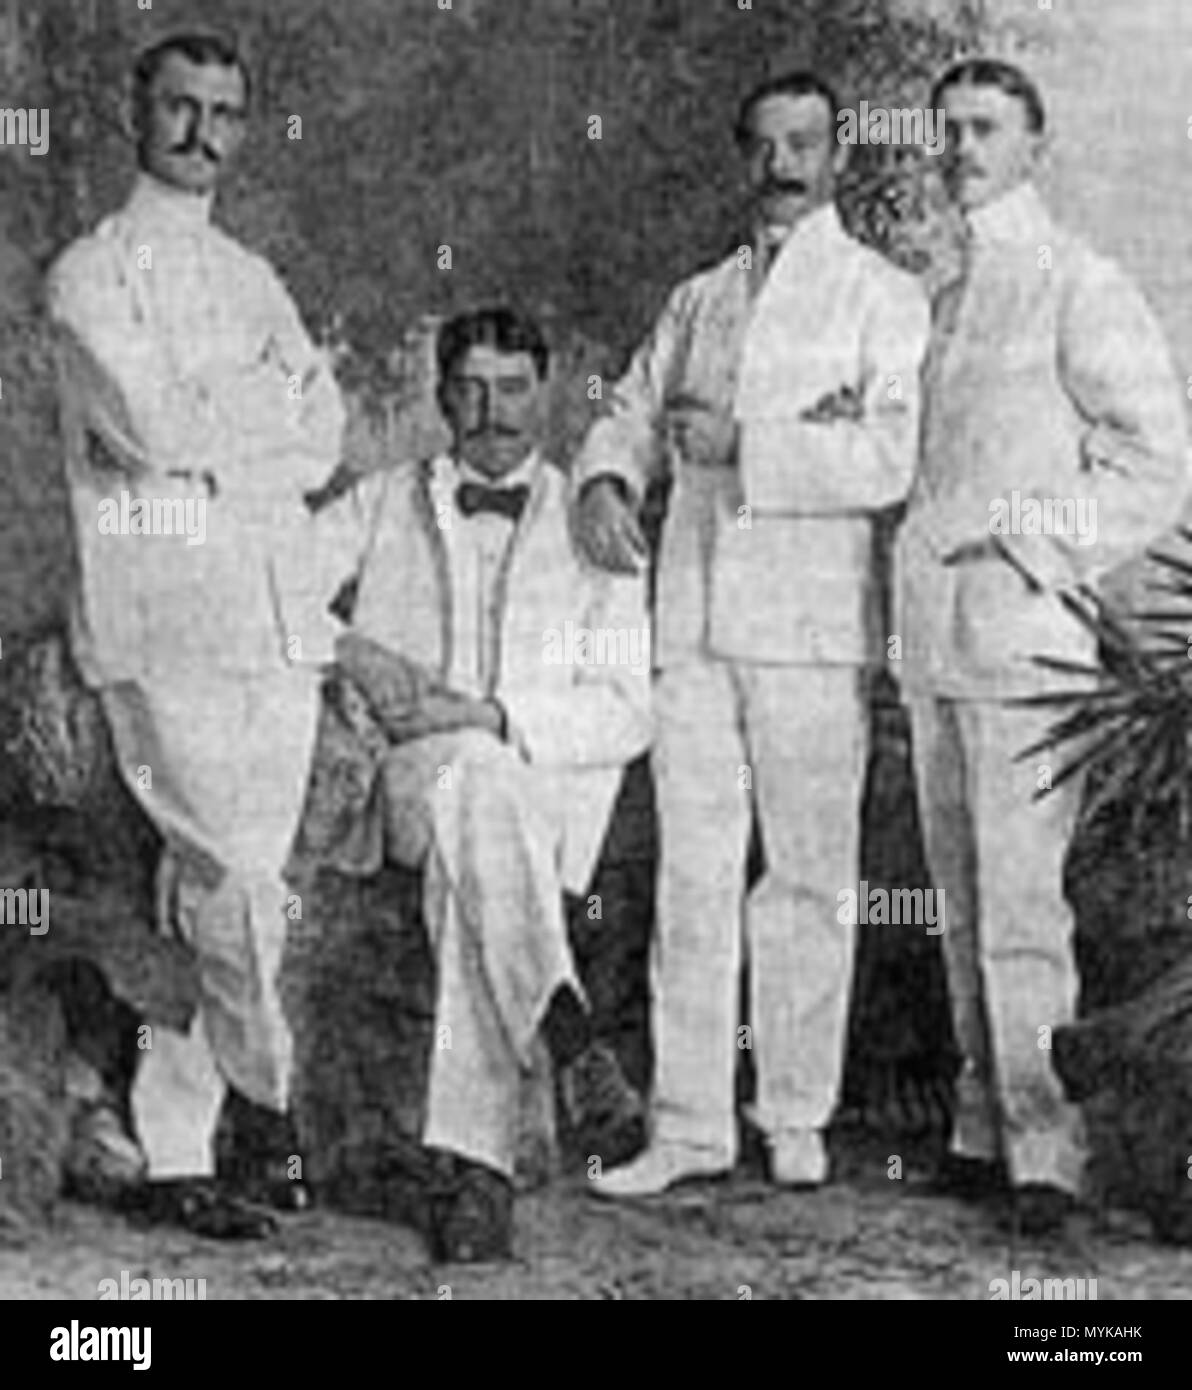 . English: Explorers and ethnographers Hiram M. Hiller, Jr. (far left), William H. Furness, III, and Alfred C. Harrison, Jr., along with Lewis Etzel, Furness' assistant. Sources appear to differ as to whether Furness or Etzel is seated. Photographed 1898 in Singapore. NOTE: The University of Pennsylvania Museum of Archaeology and Anthropology lists the figures as (left to right): Hiller, Etzel (seated), Furness, Harrison.[1] Français : Hiller (à gauche), Furness et Harrison, en compagnie de Lewis Etzel, l'assistant de Furness. Photographie prise à Singapour en1898 . 1898. Unknown 241 Hiller-Fu Stock Photo